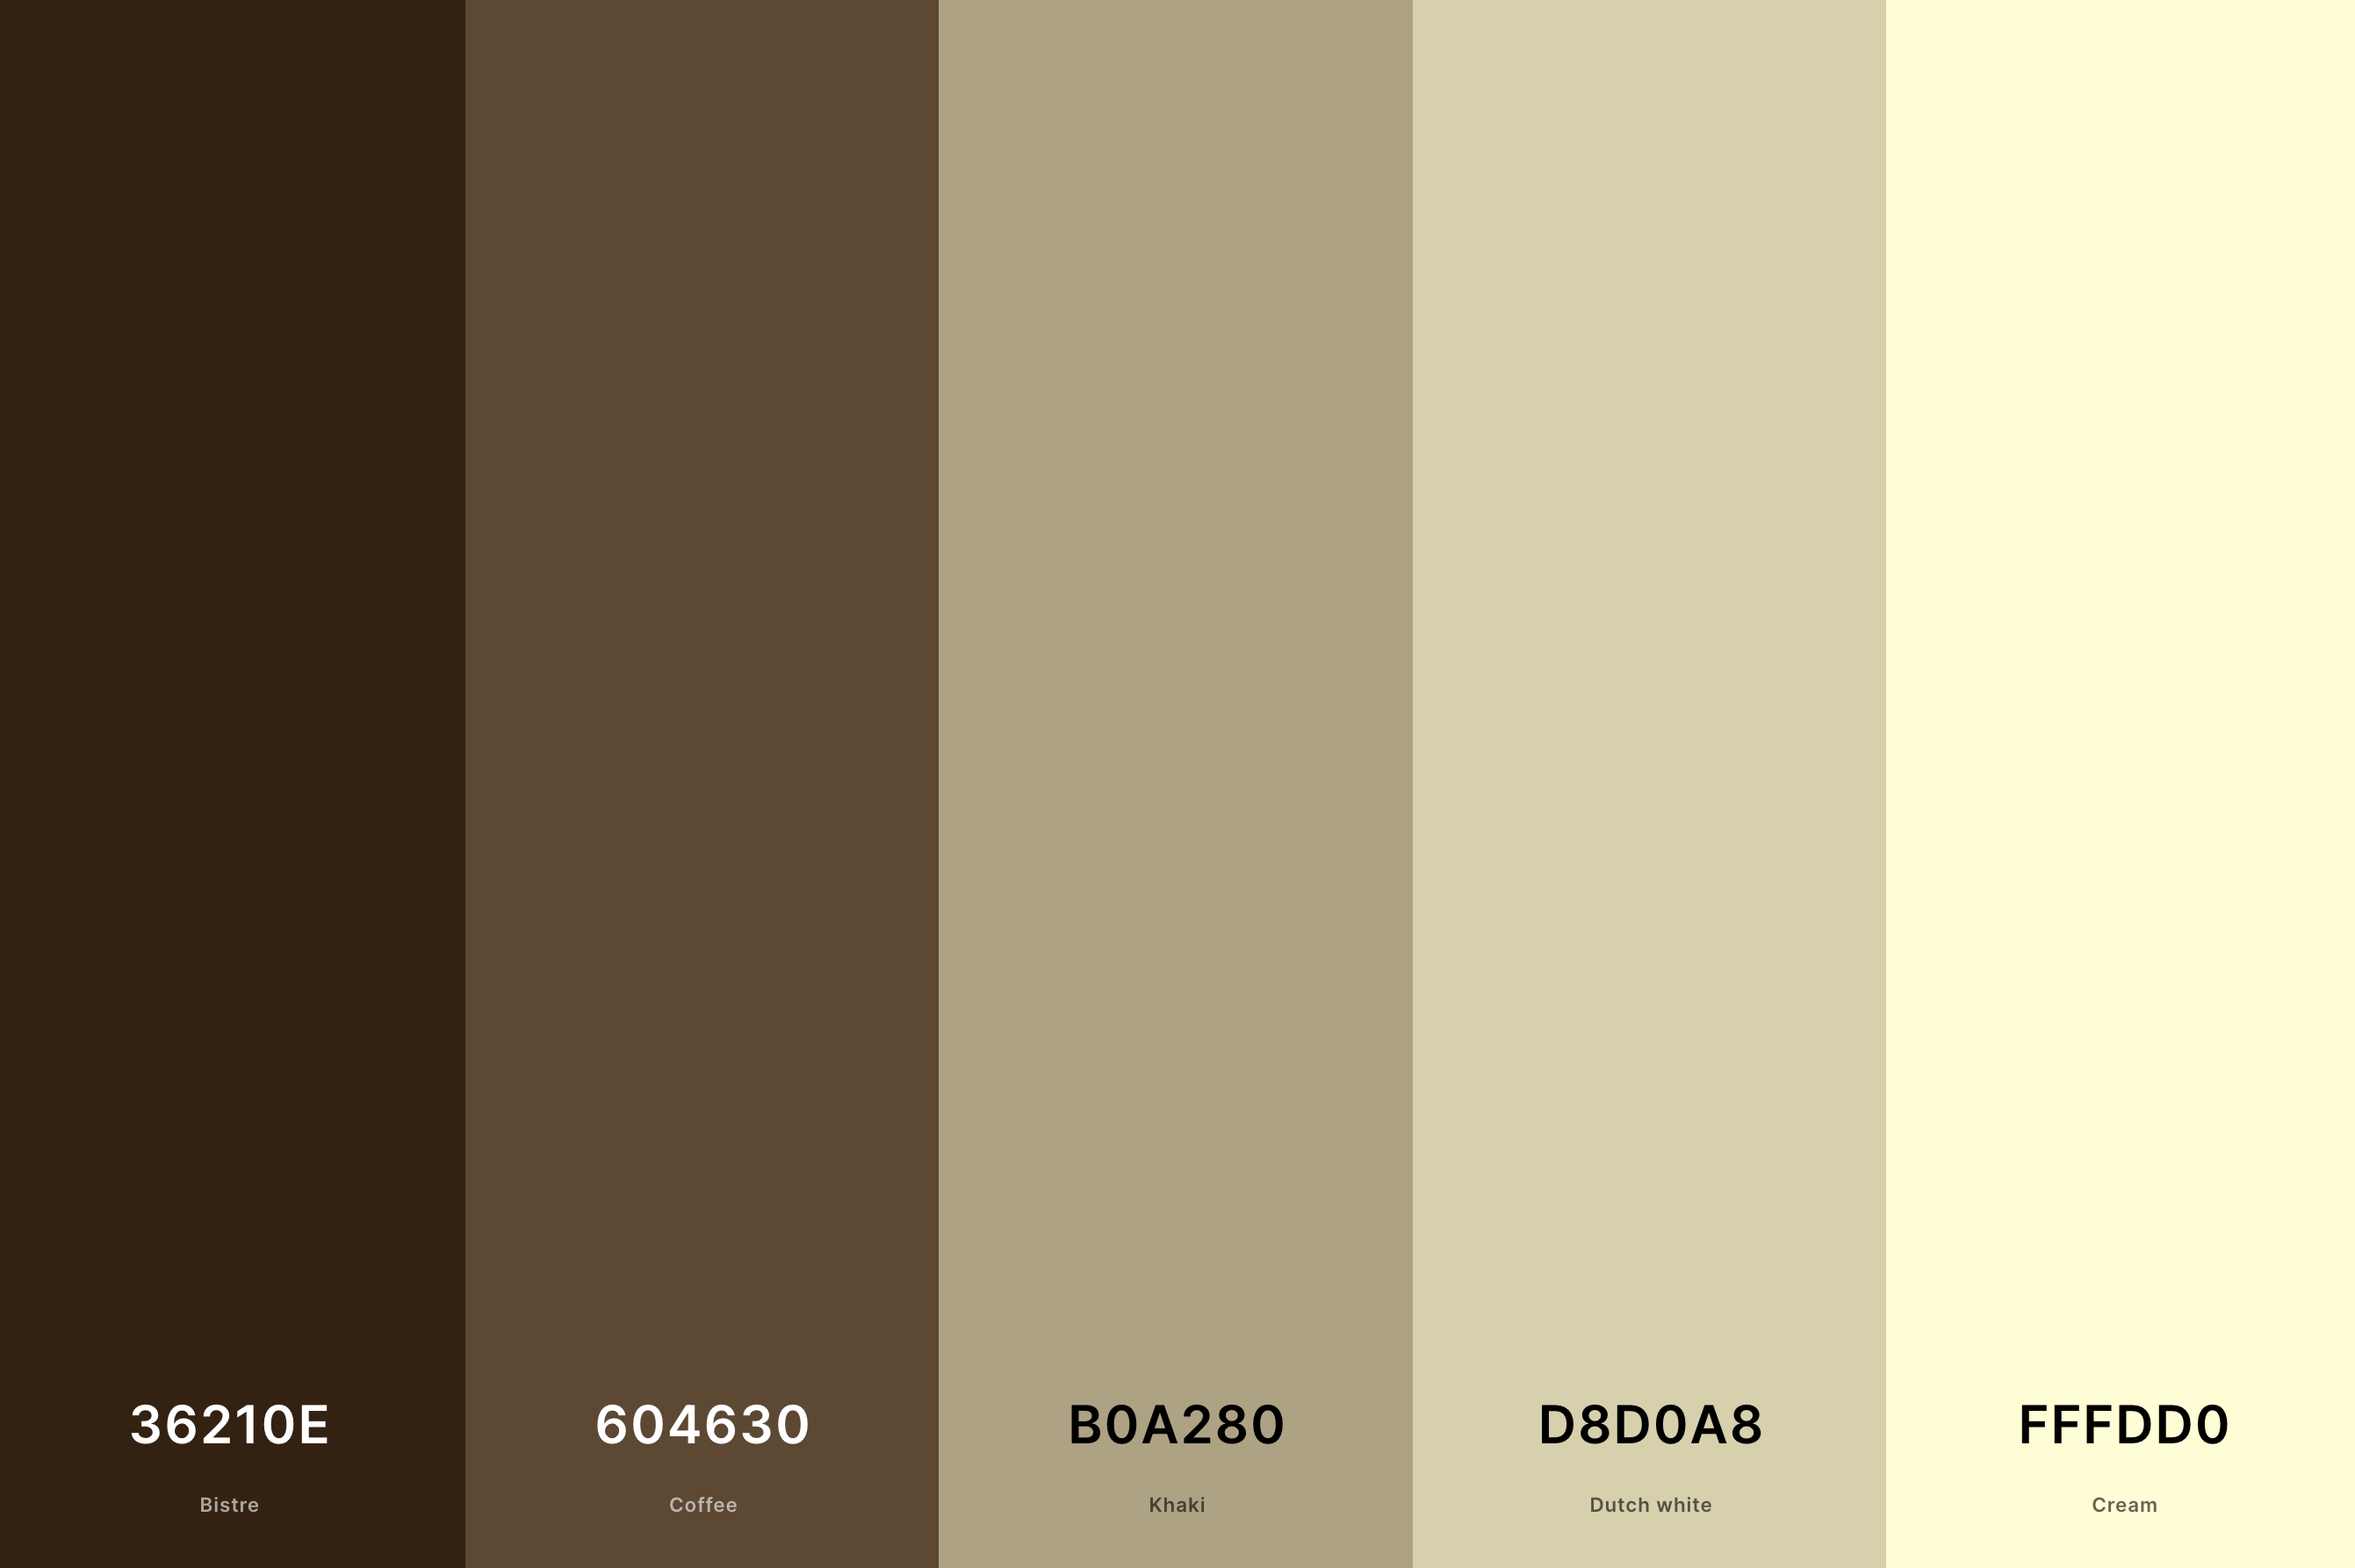 4. Cream And Coffee Color Palette Color Palette with Bistre (Hex #36210E) + Coffee (Hex #604630) + Khaki (Hex #B0A280) + Dutch White (Hex #D8D0A8) + Cream (Hex #FFFDD0) Color Palette with Hex Codes